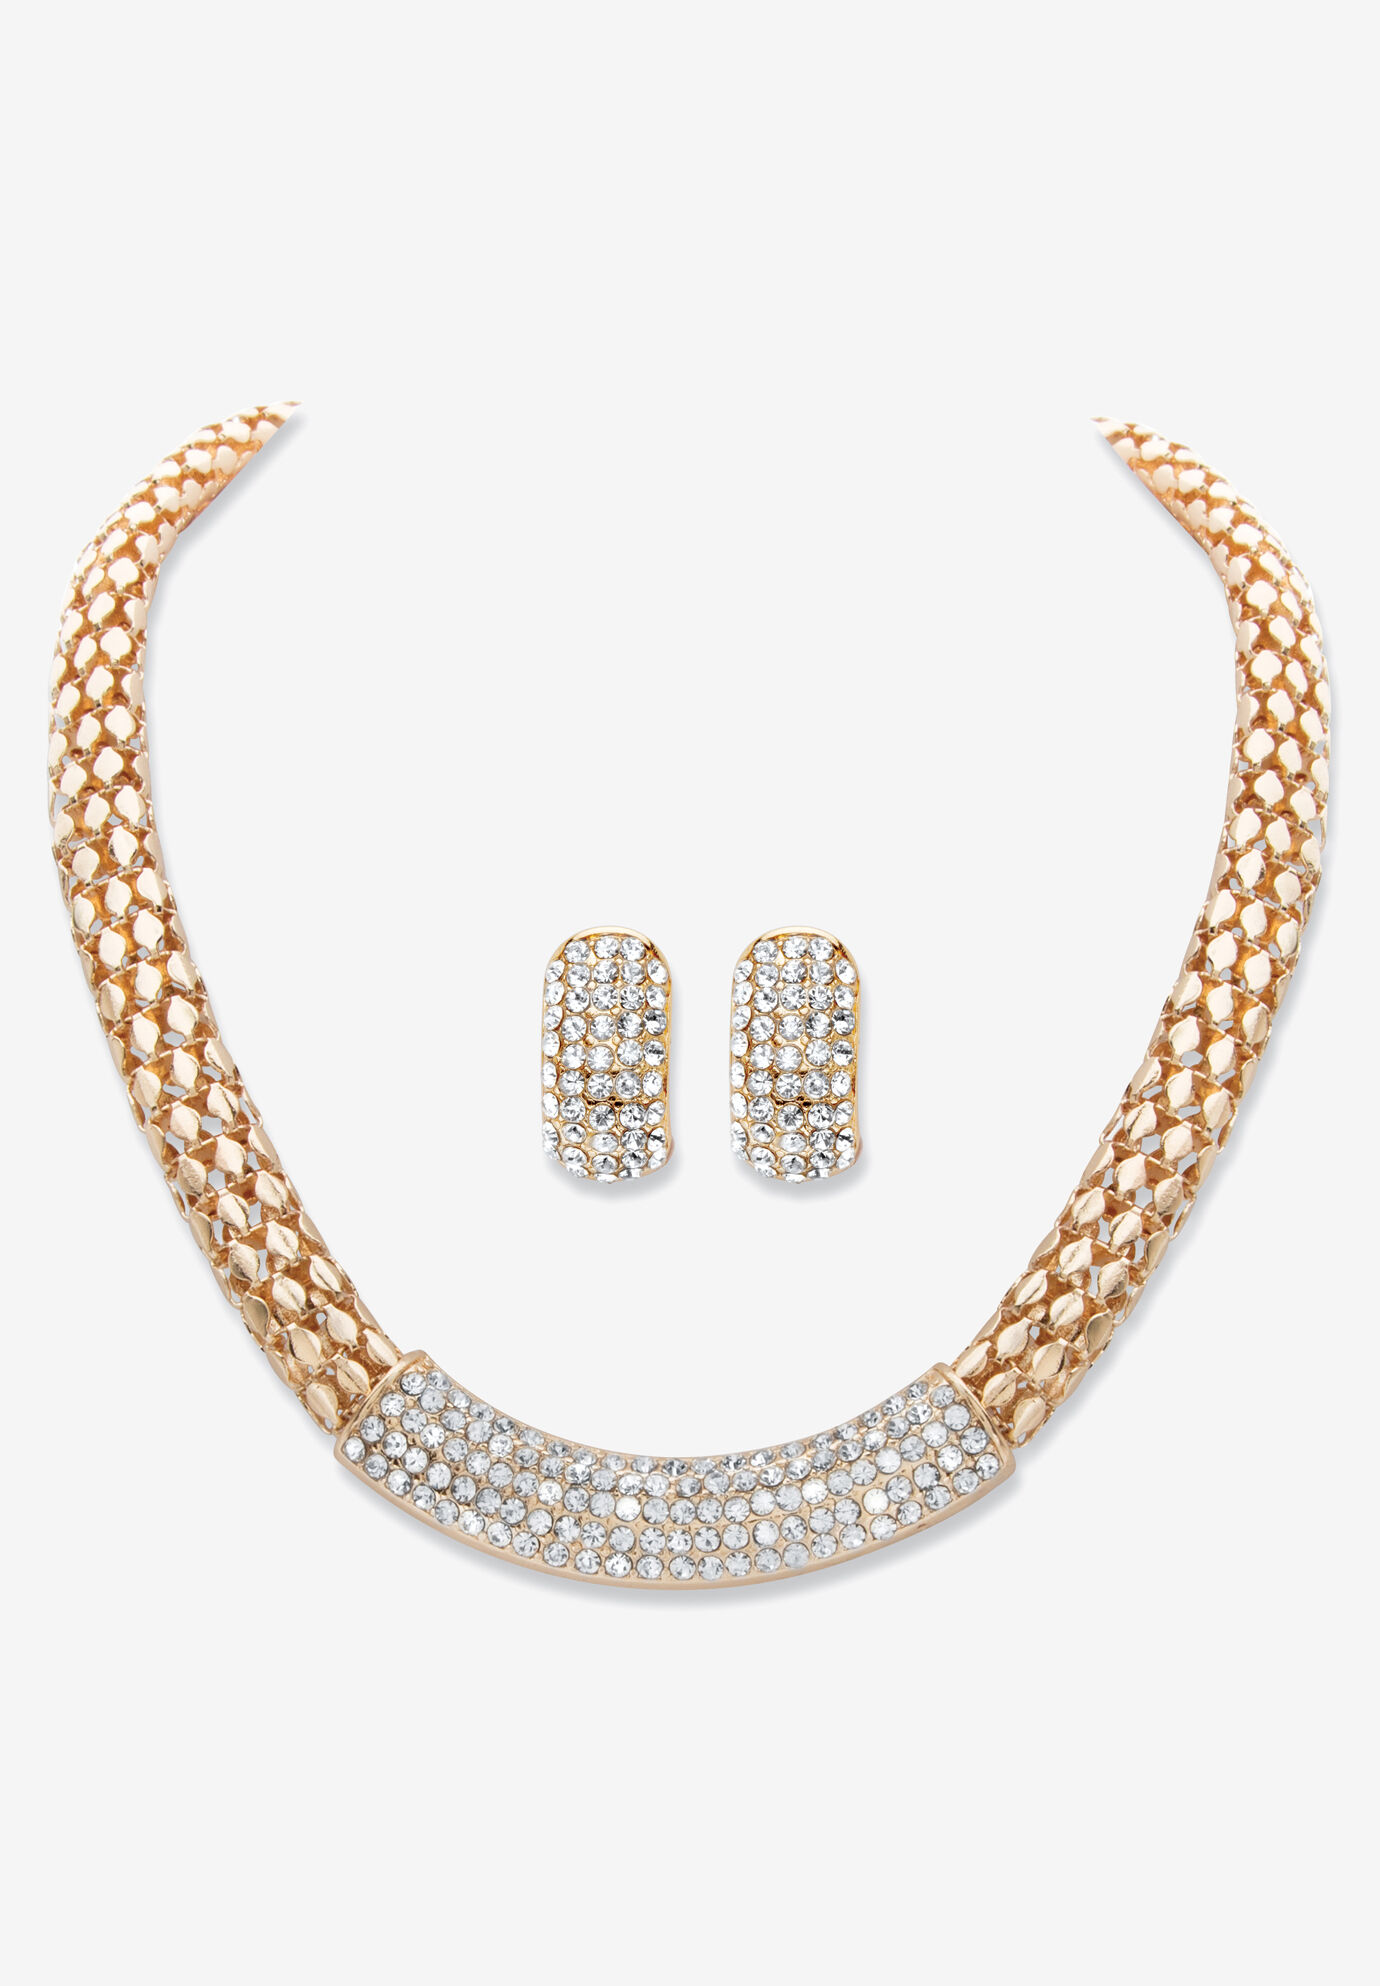 Goldtone Crystal Earring and Choker Necklace Set, 17 - 20